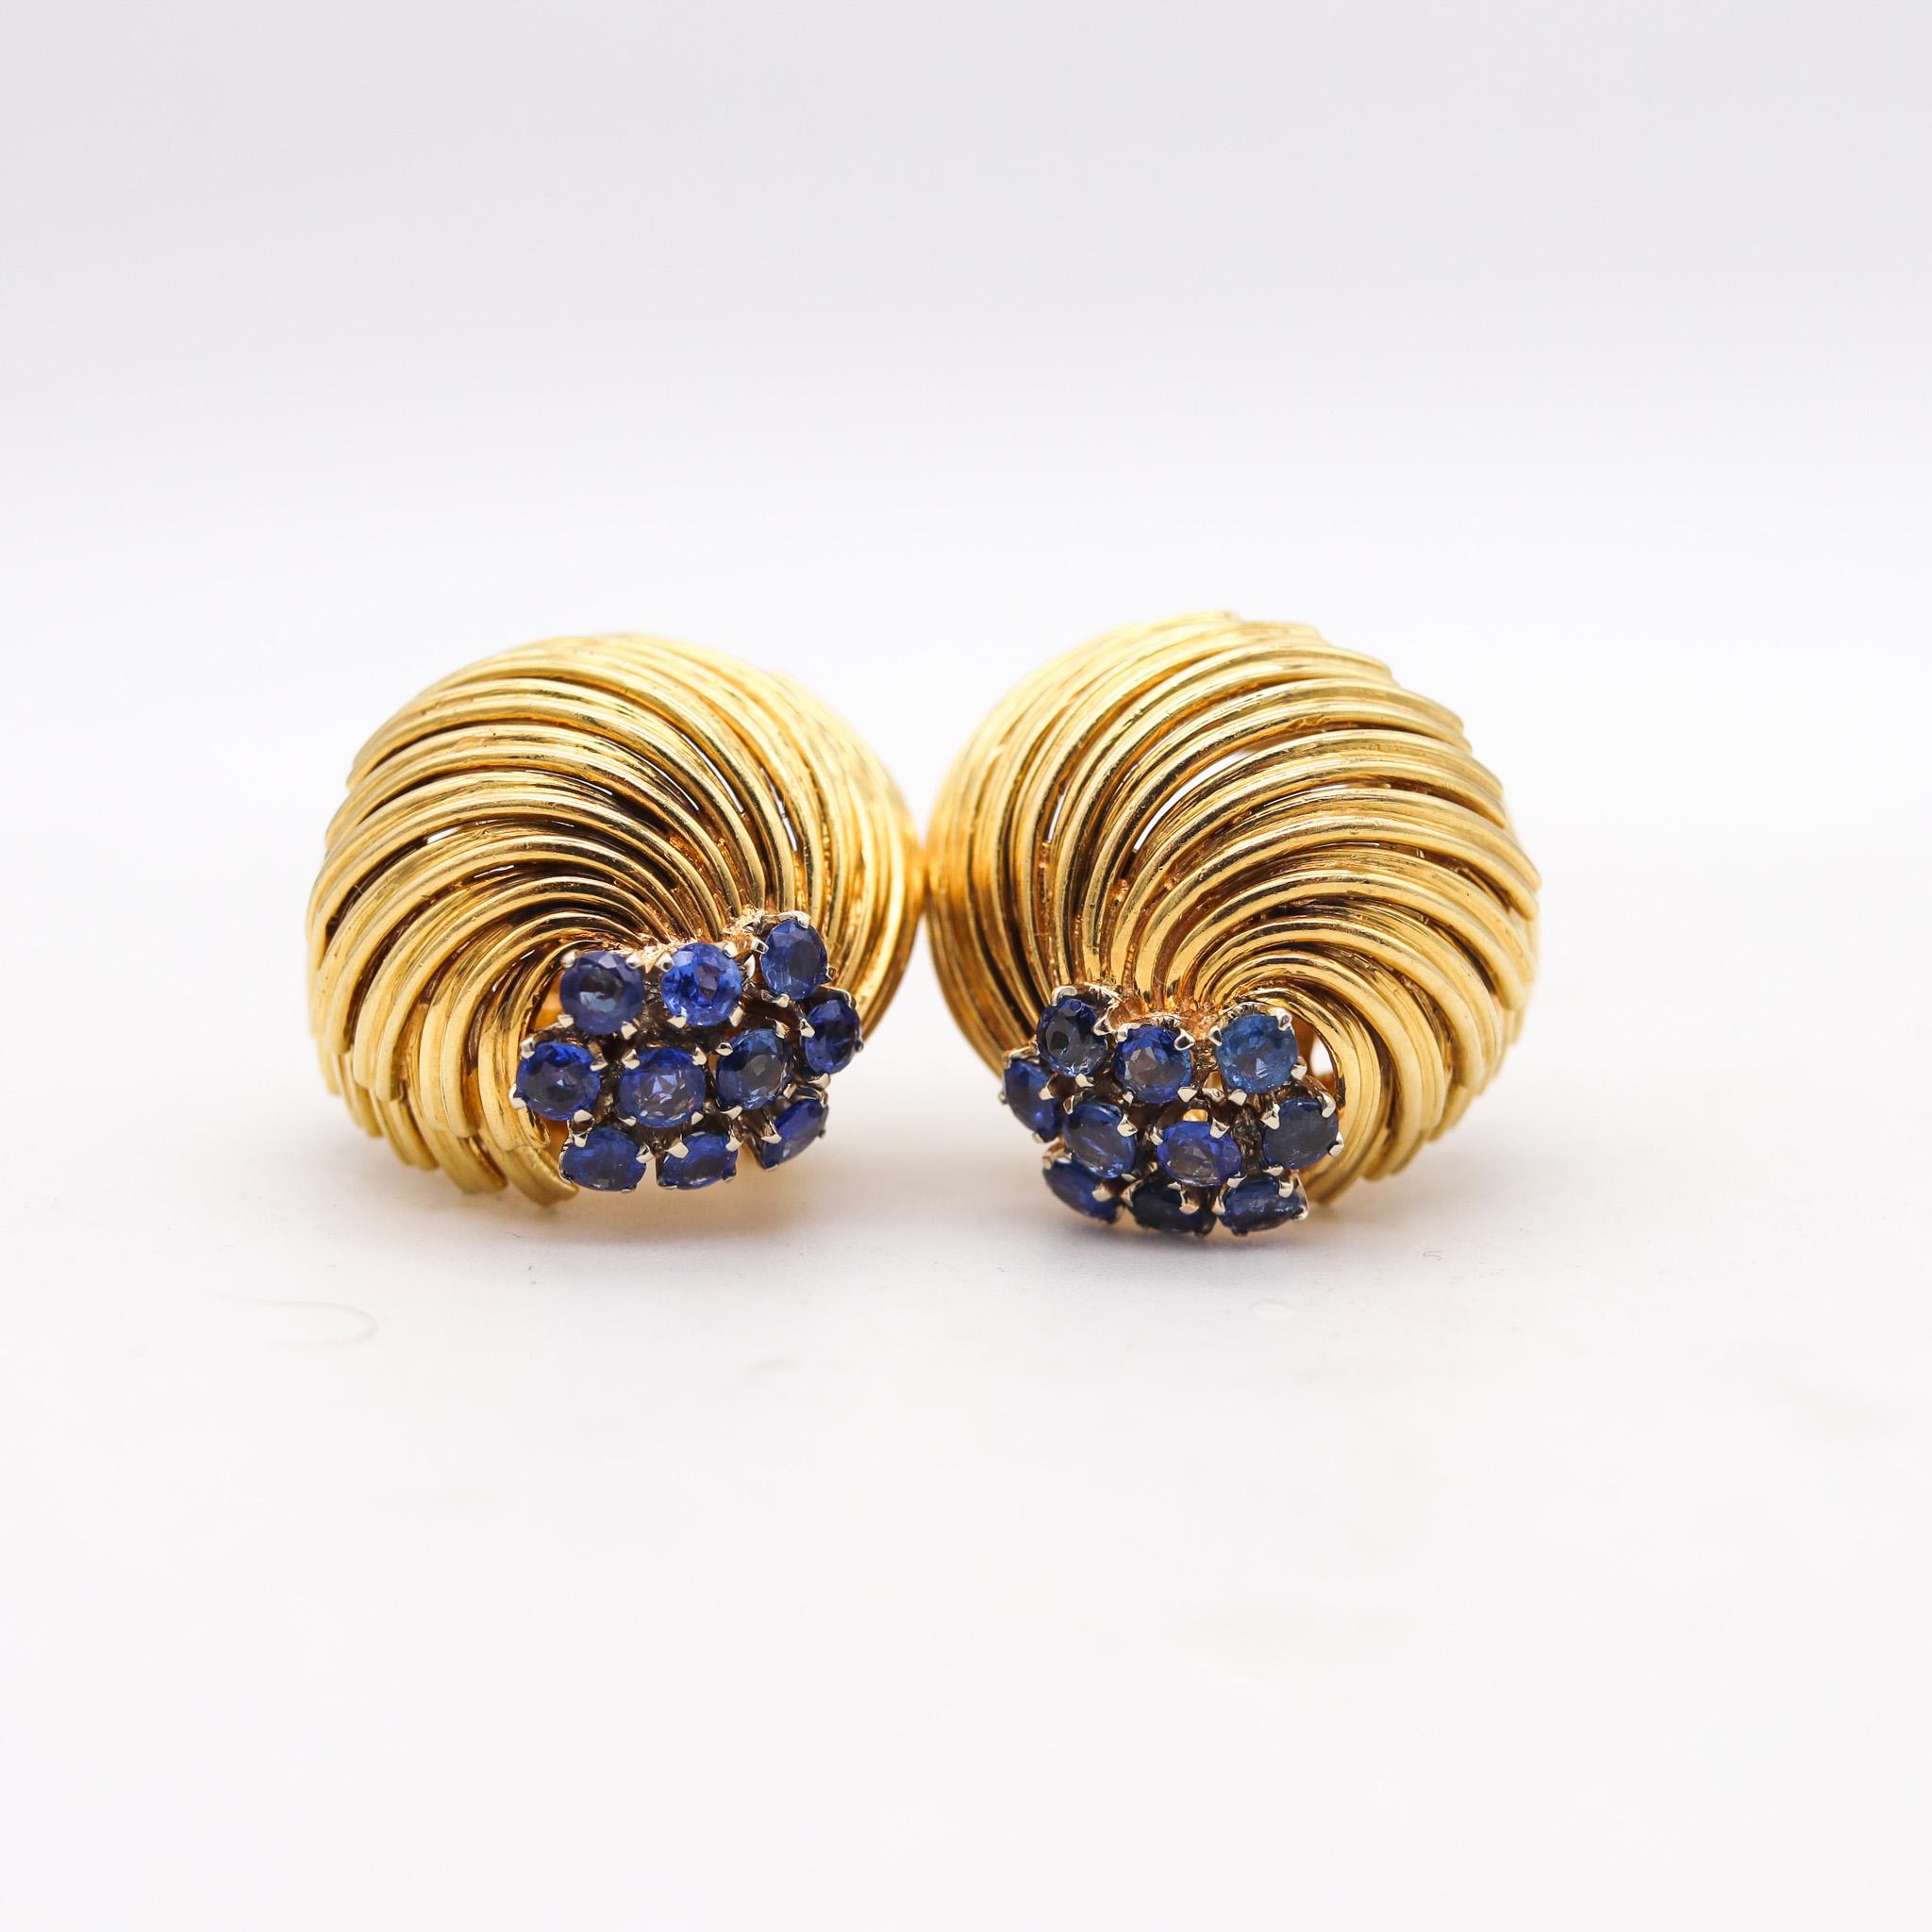 Ear-clips designed by David Balogh.

Outstanding pair of clip on earrings created by David Balogh, back in the 1960's. This modernist pair has been crafted with a bombe shape in solid yellow gold of 18 karats with polished finish. Fitted with posts